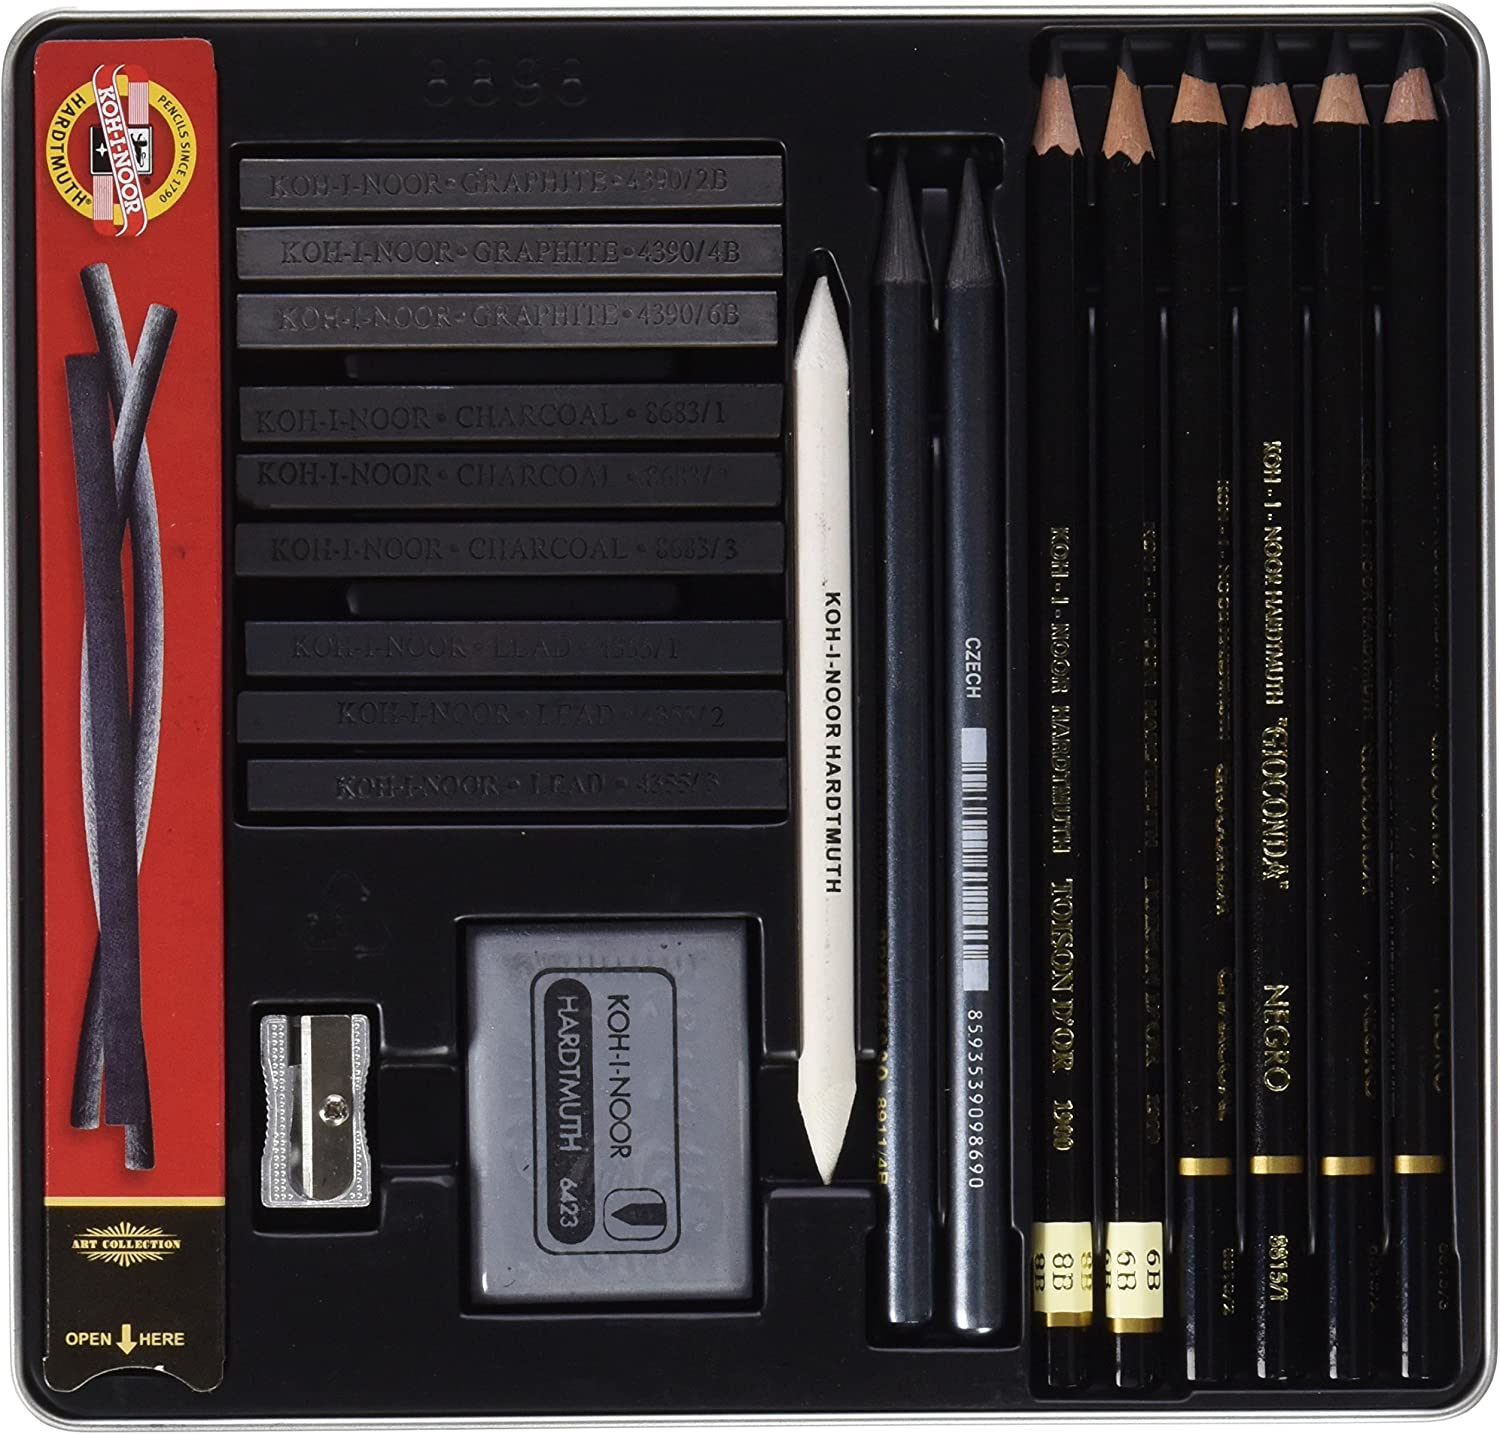 Best Pencils For Drawing & Sketching: A Buyer's Guide For Artists